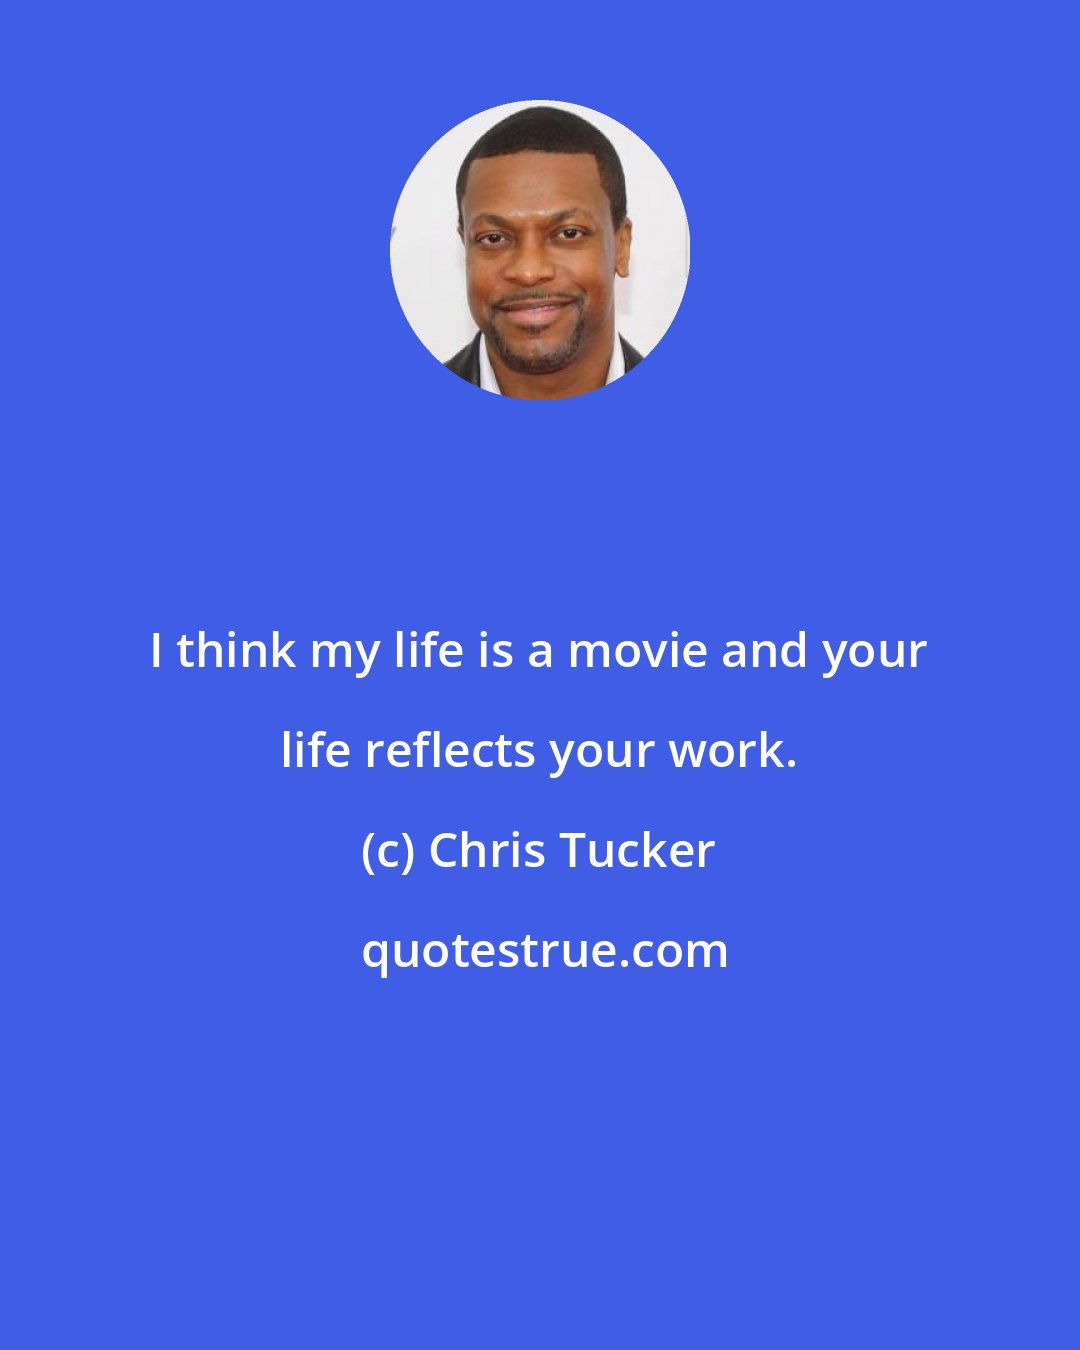 Chris Tucker: I think my life is a movie and your life reflects your work.